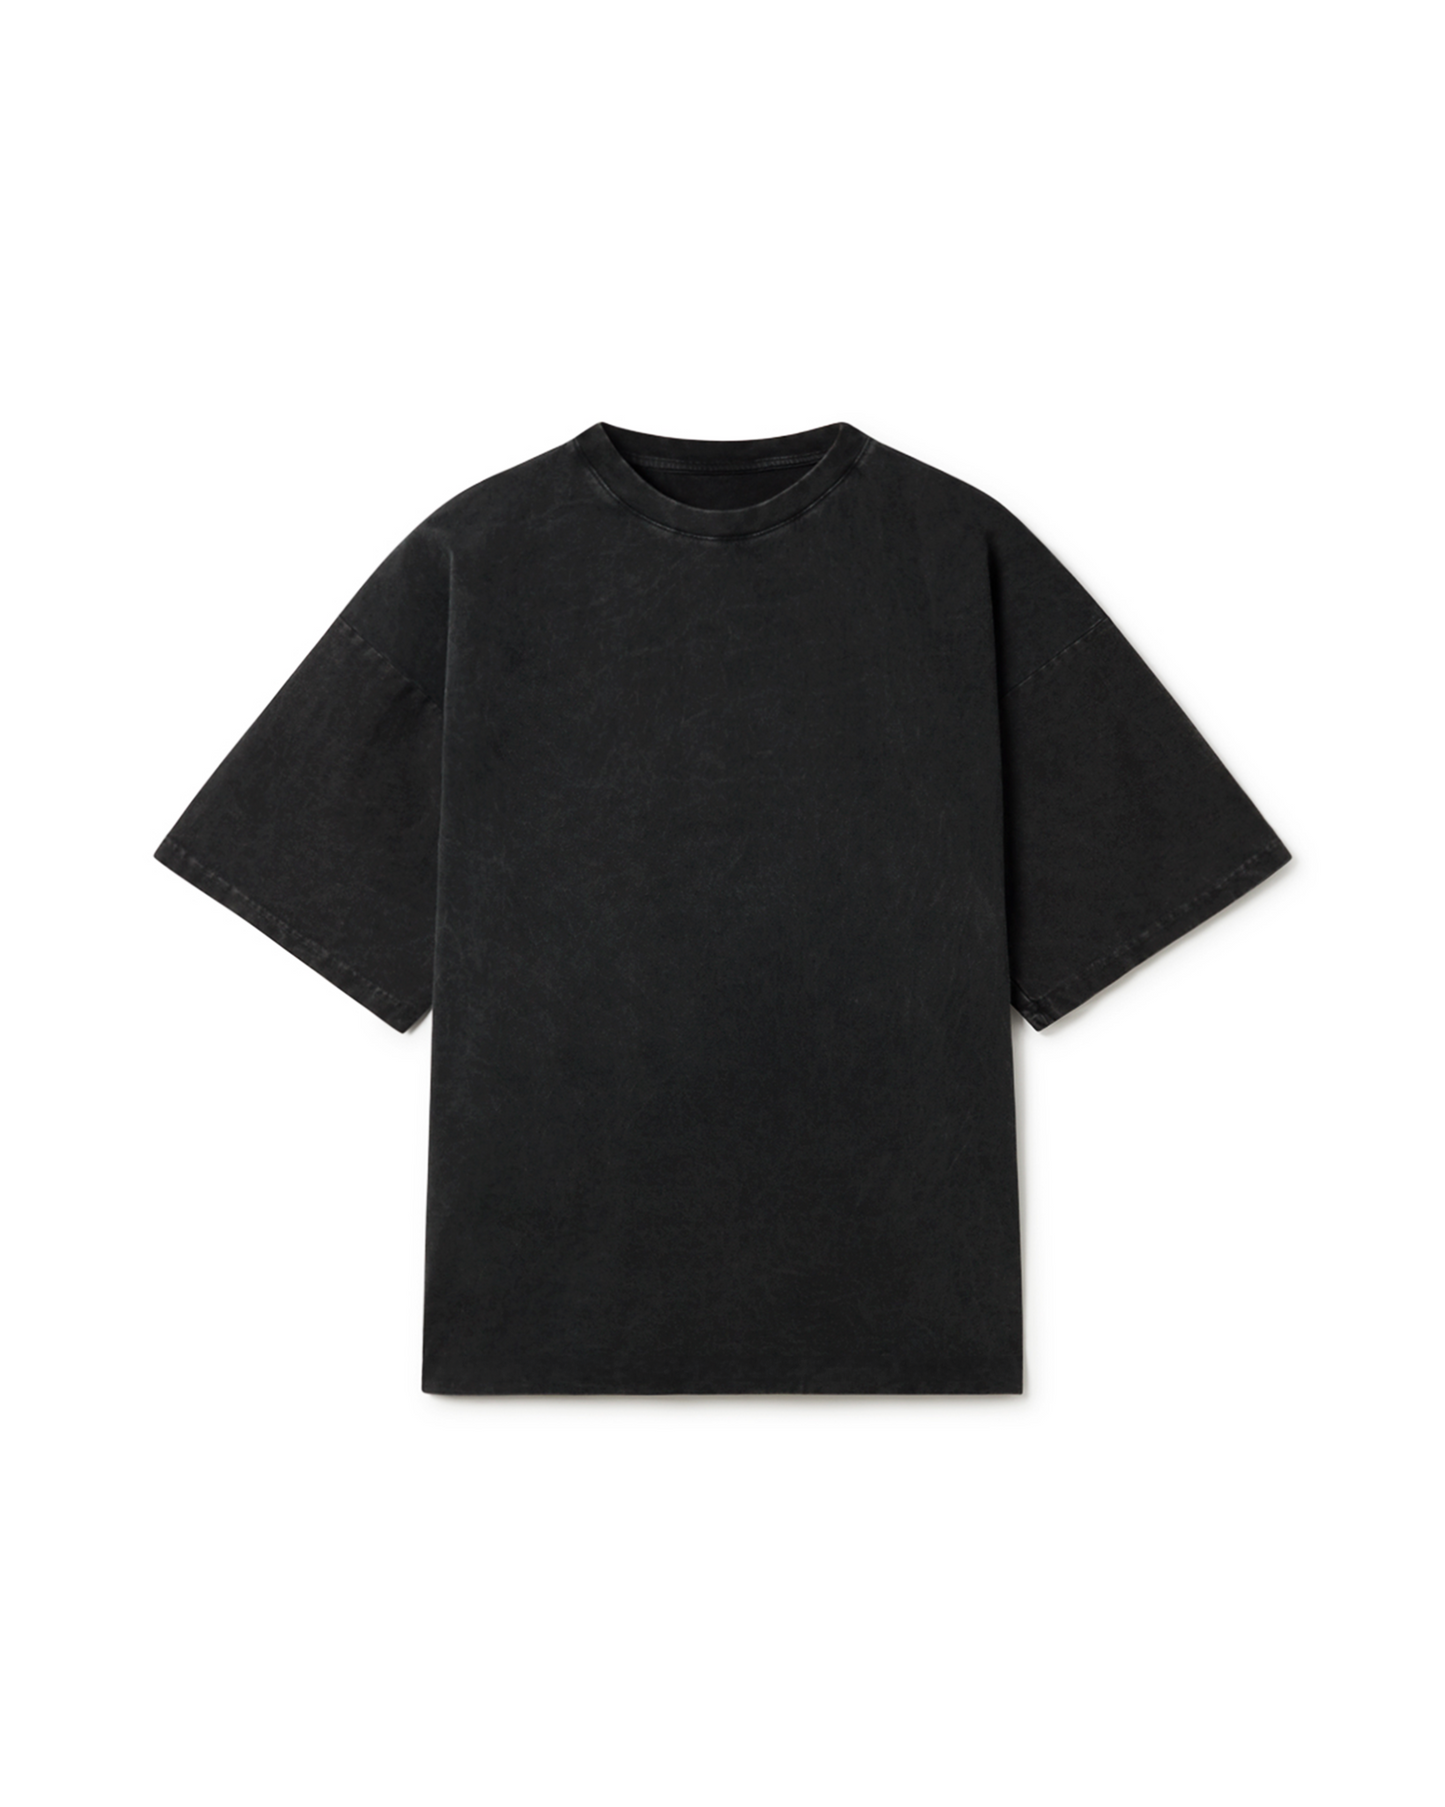 84 OVERSIZED FADED T-SHIRT